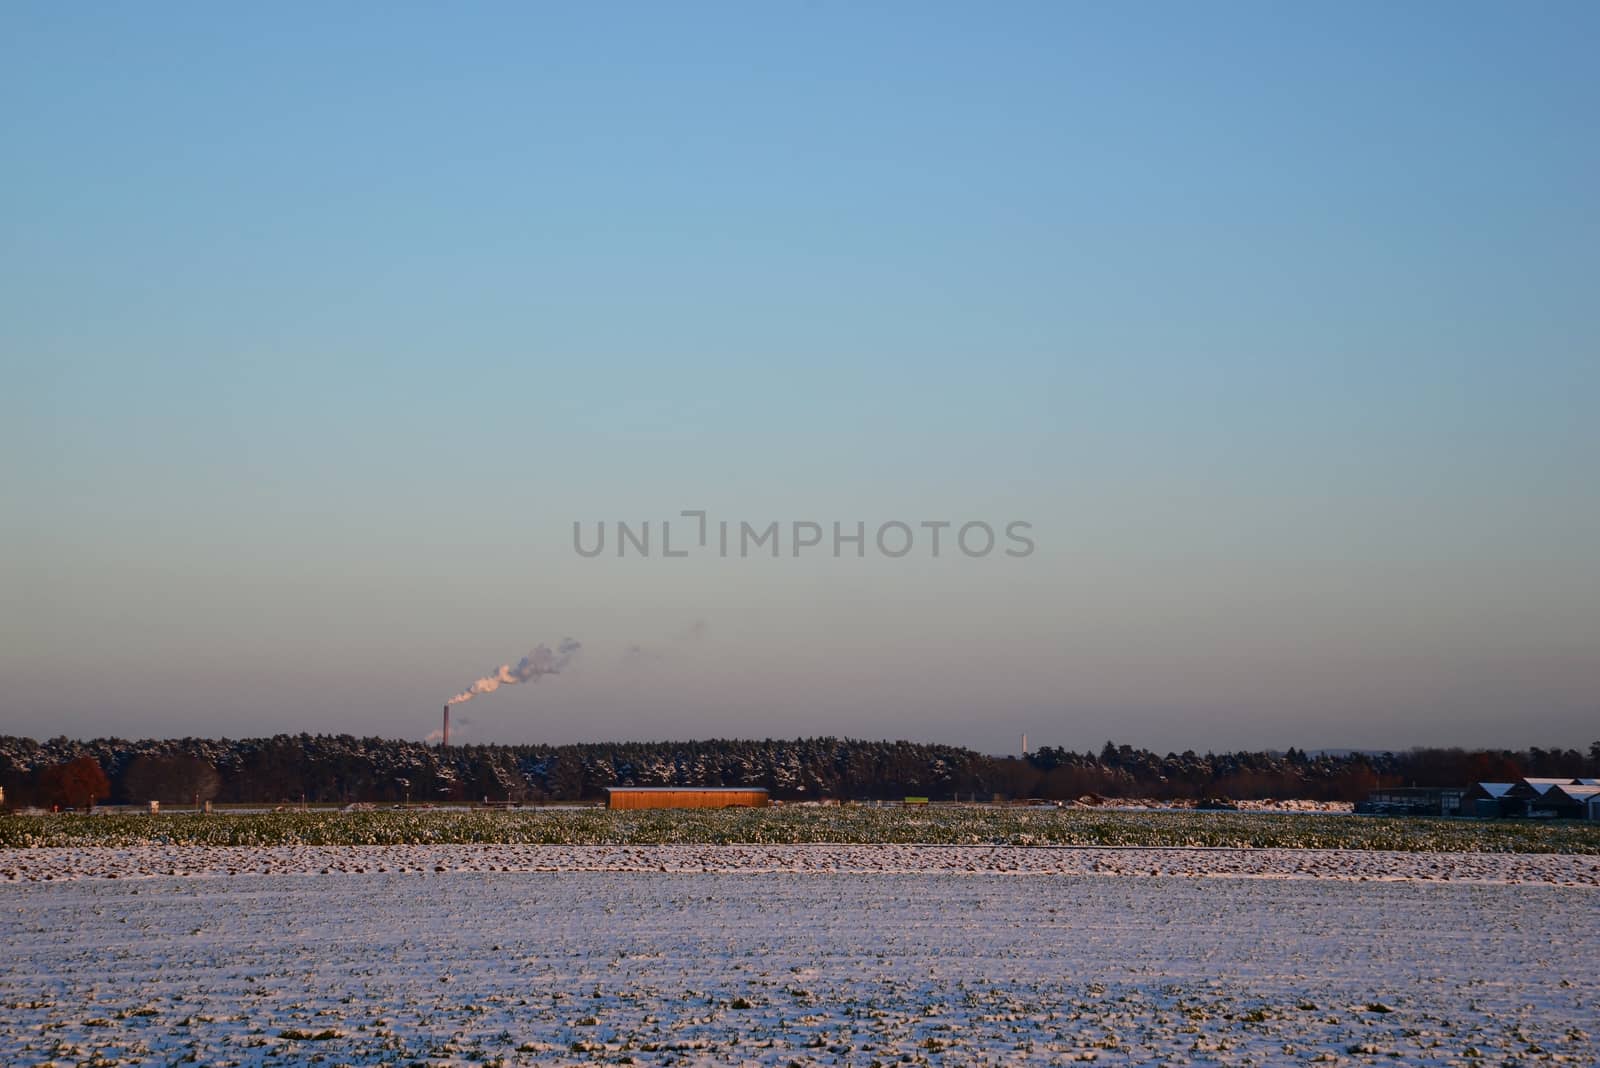 Photo of industrial smoke from a chimney during winter time. Illustration of industrial pollution, environmental problems.
Taken in Germany.